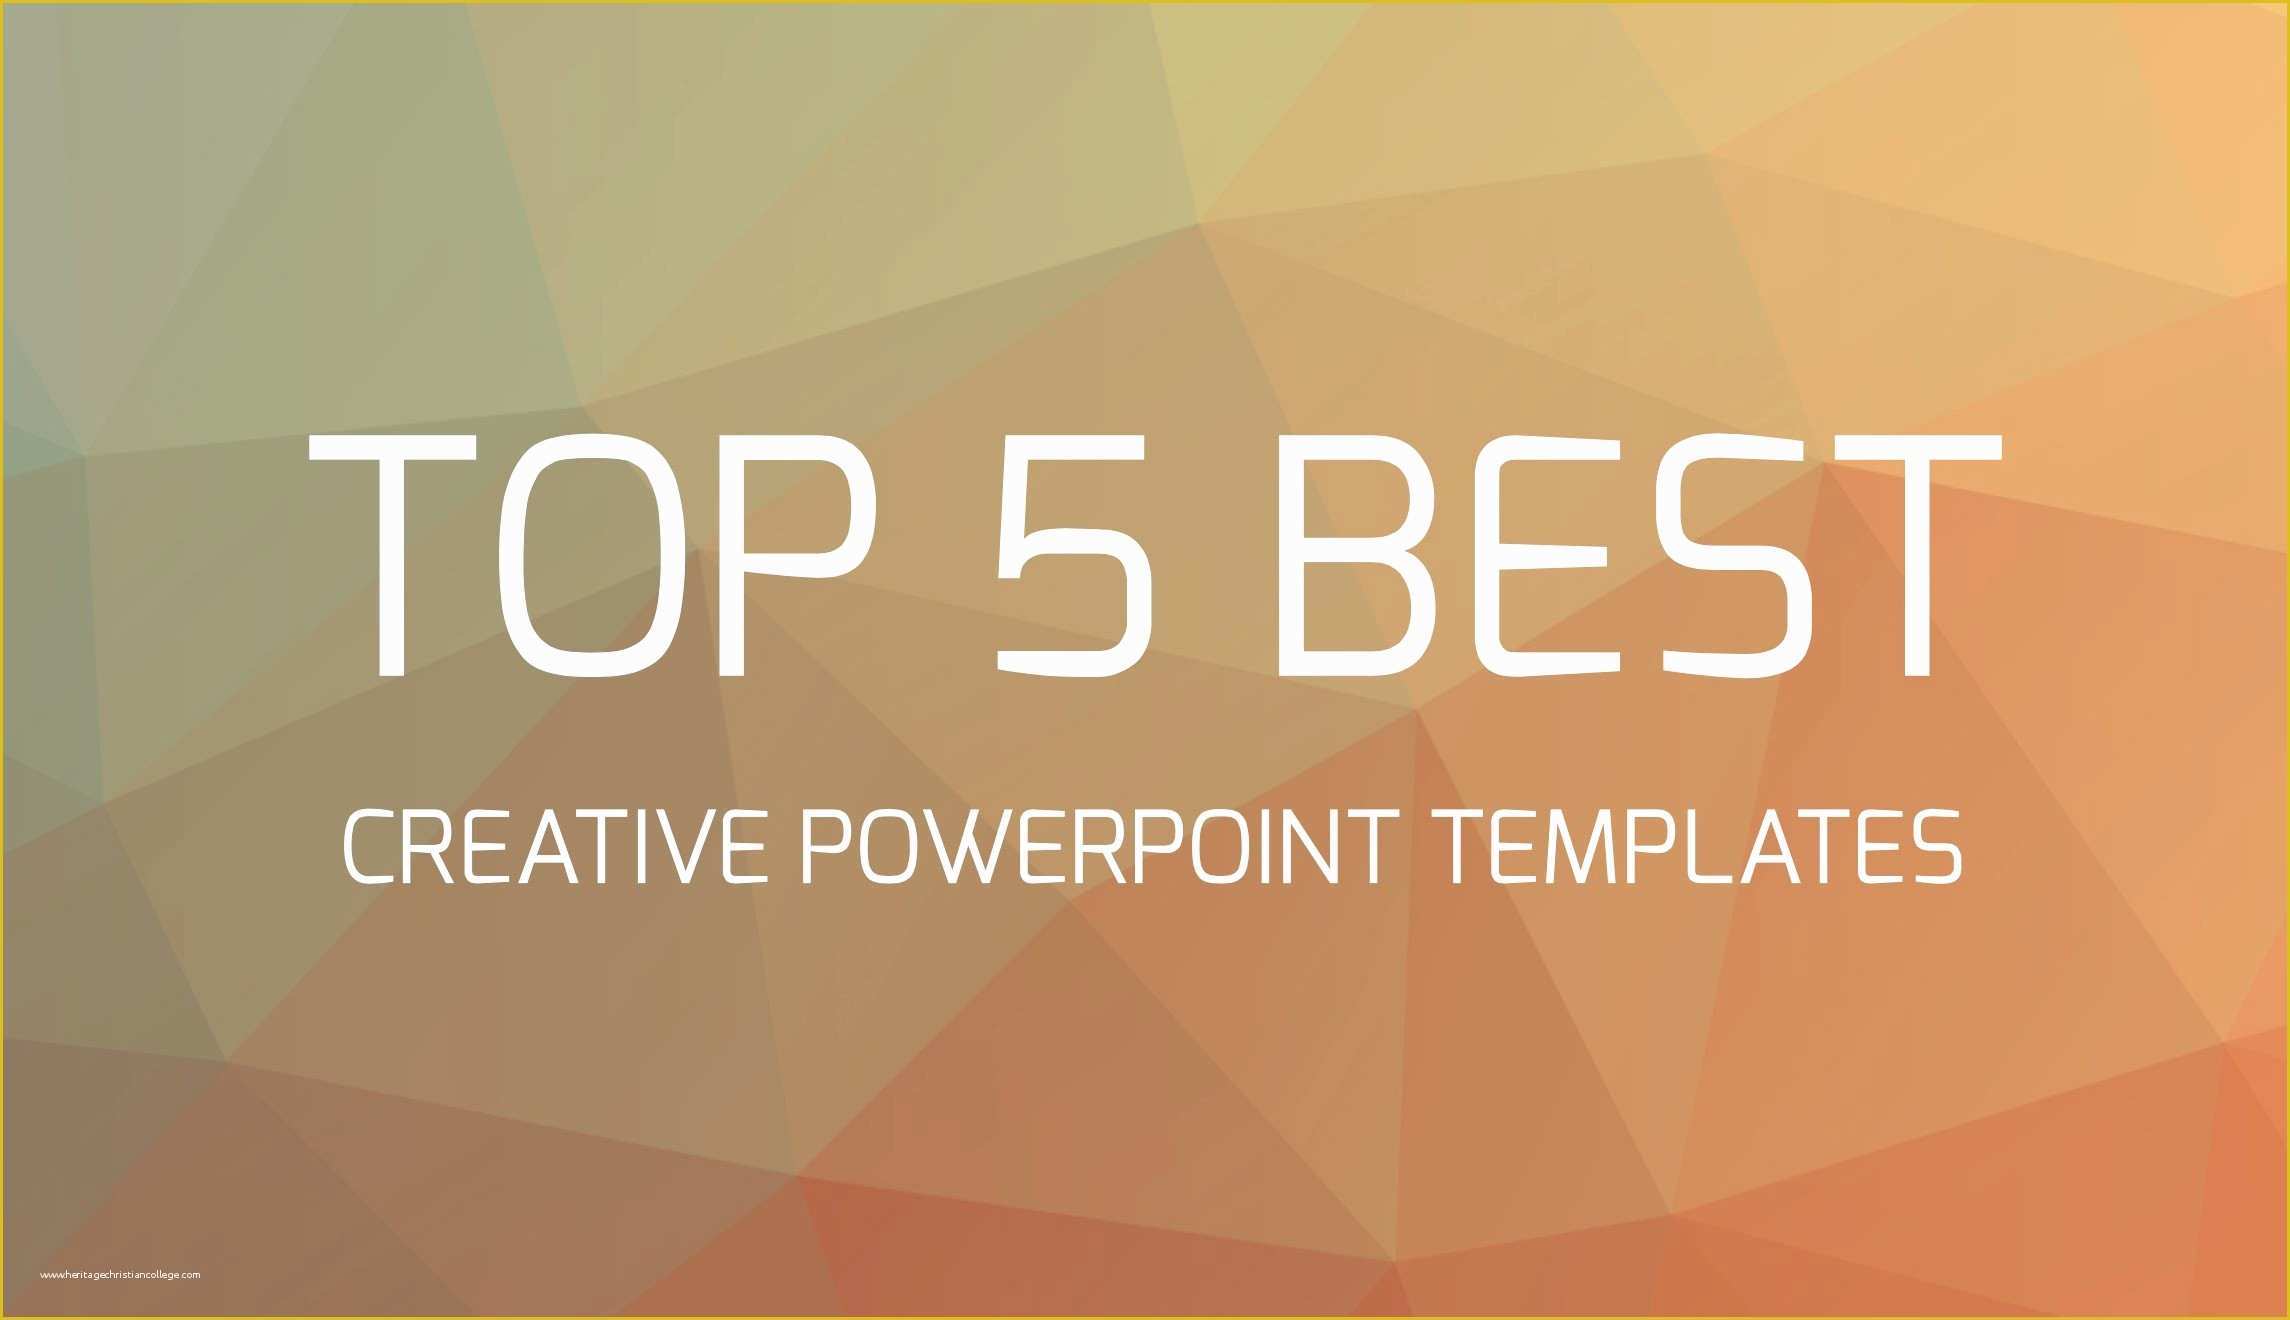 Creative Powerpoint Templates Free Download Of 42 Cool Powerpoint Backgrounds ·① Download Free Awesome